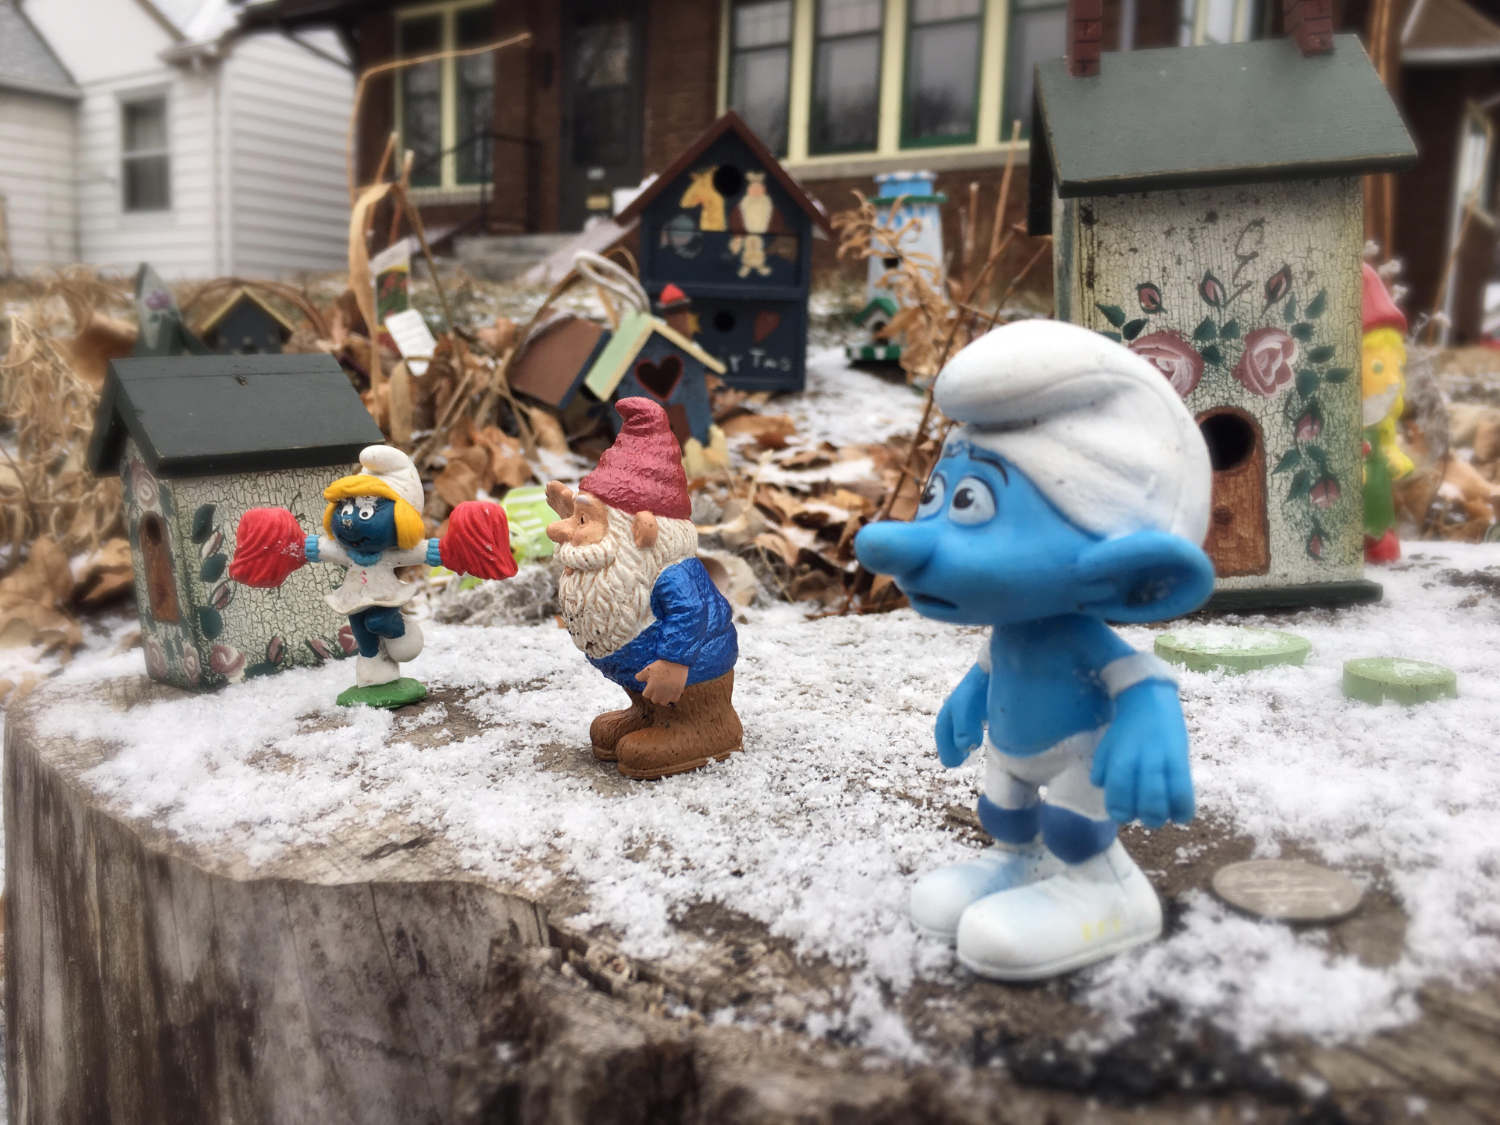 smurf and gnome statuettes on frosted wood stump with toy houses